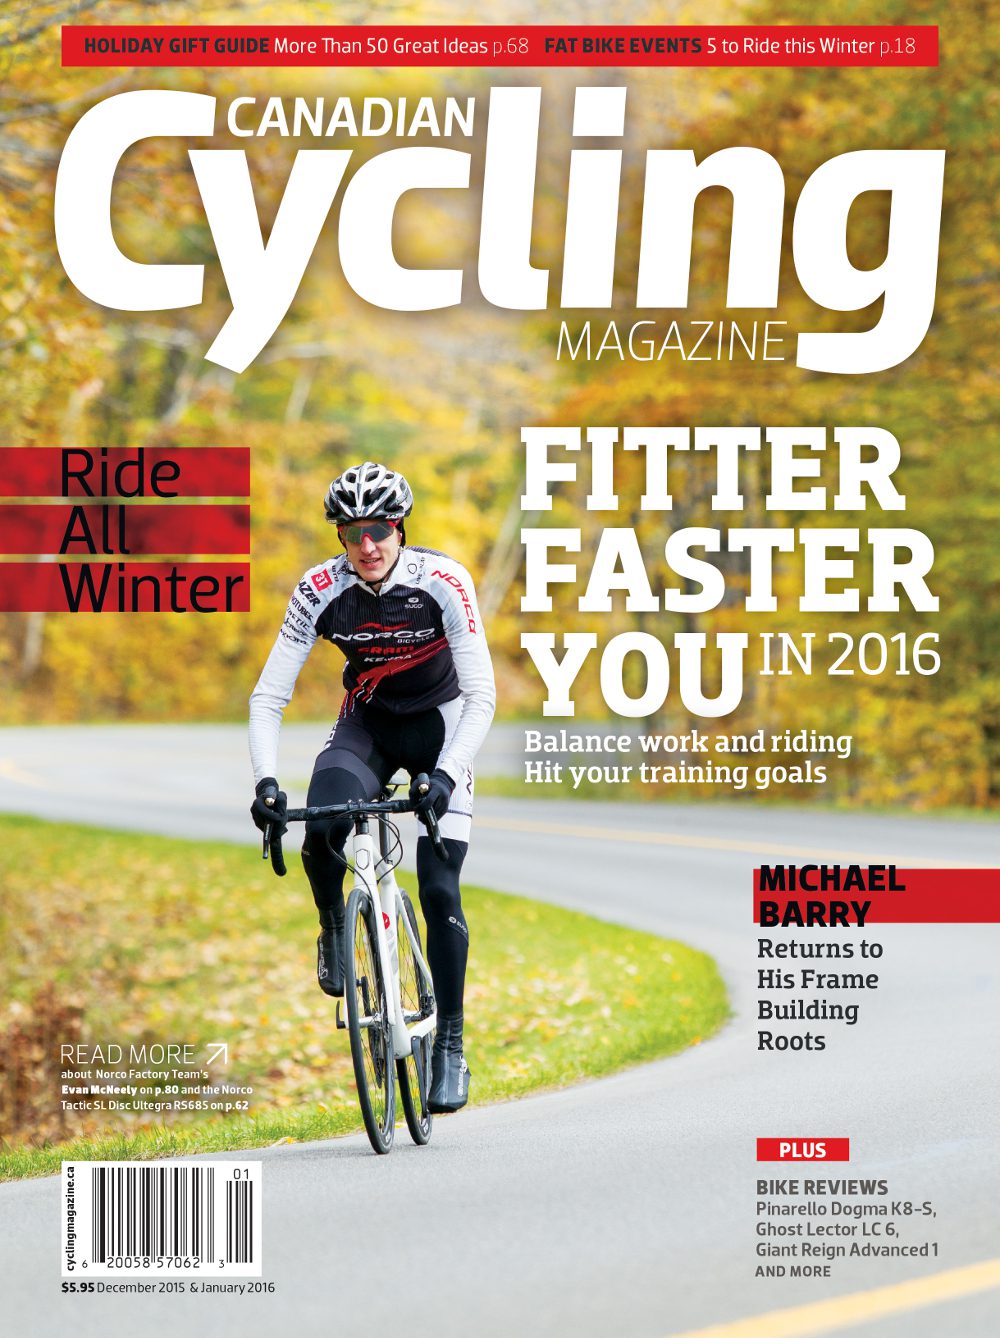 Canadian Cycling Magazine Issue 6 6 December 2015 January 2016